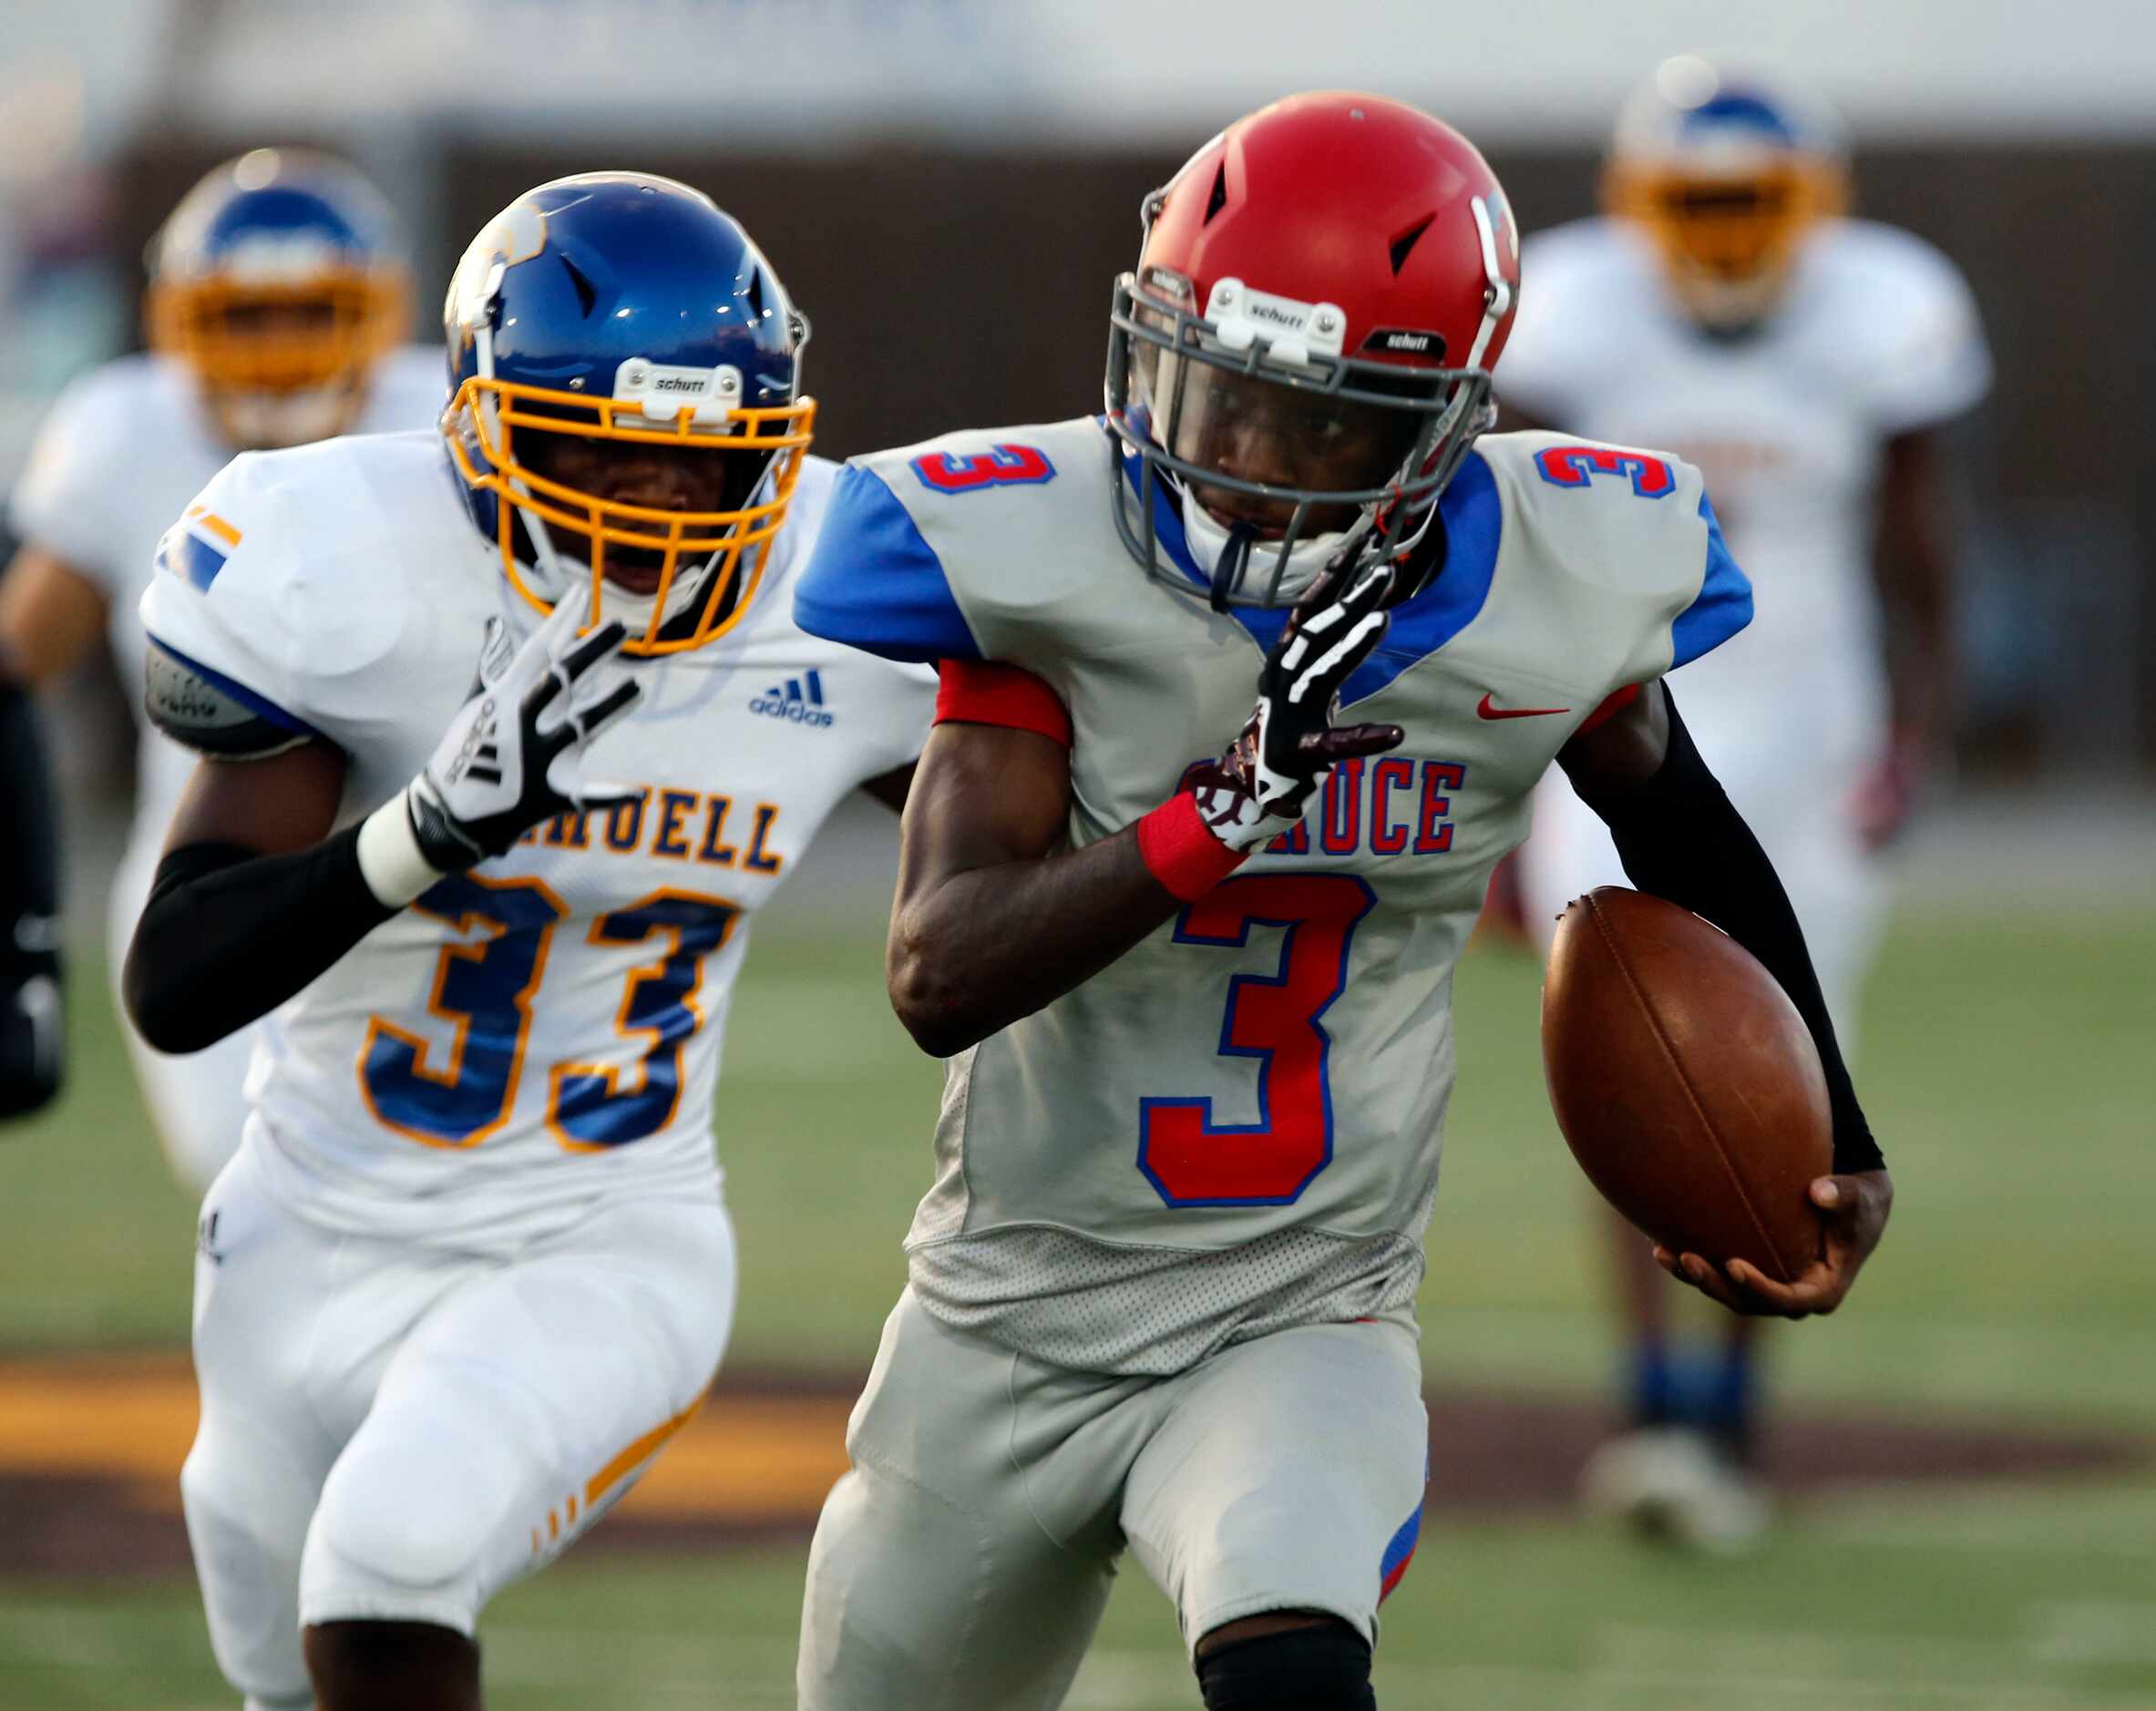 Samuell High defender Sharray Savage (33) chases Spruce QB Timad Cotton (3) during the first...